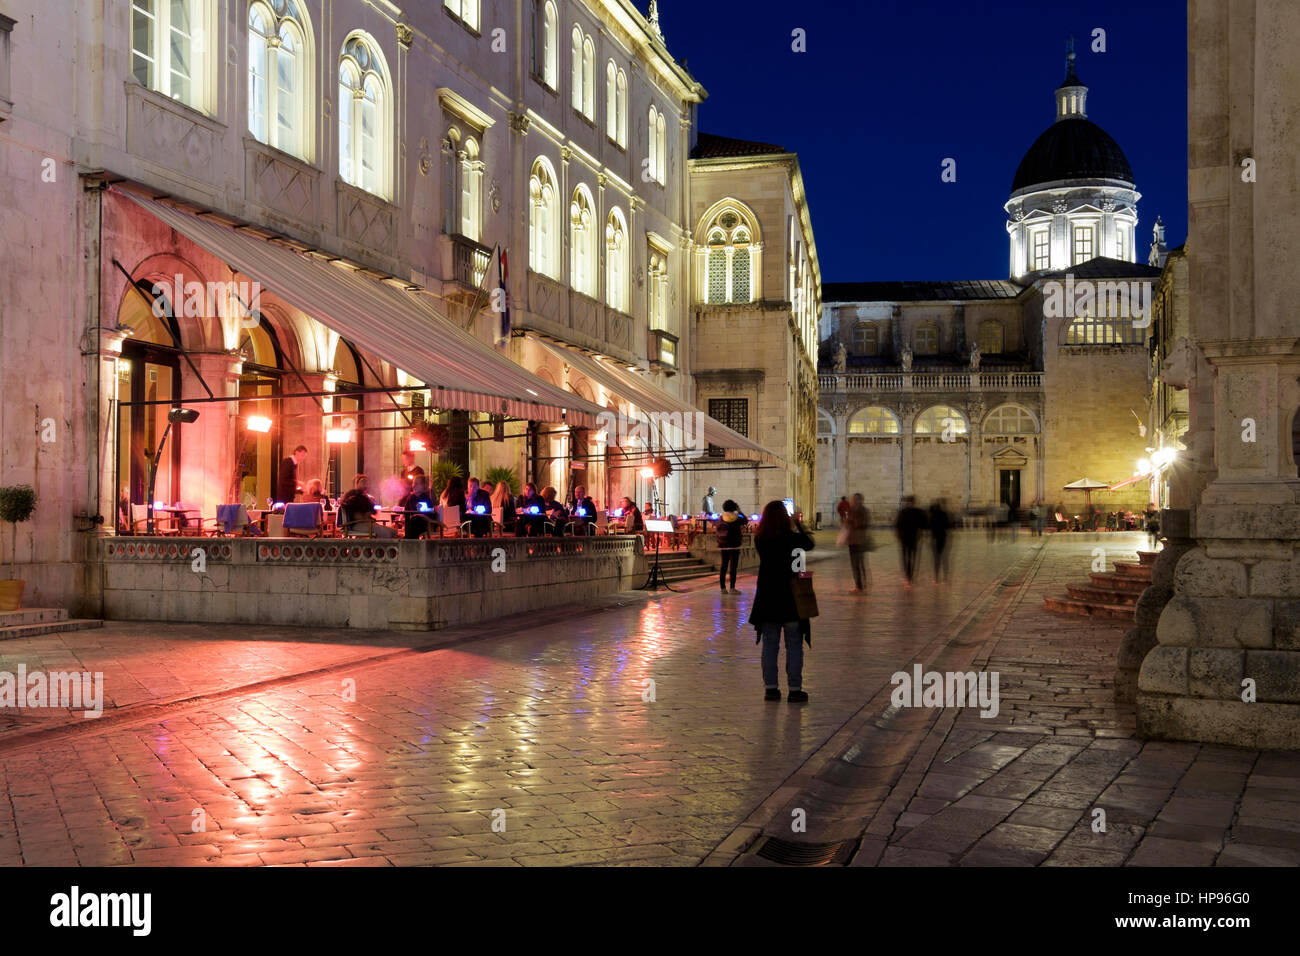 People alfresco dining near the Cathedral, Stradum (Placa), early evening, Dubrovnik, Croatia Stock Photo